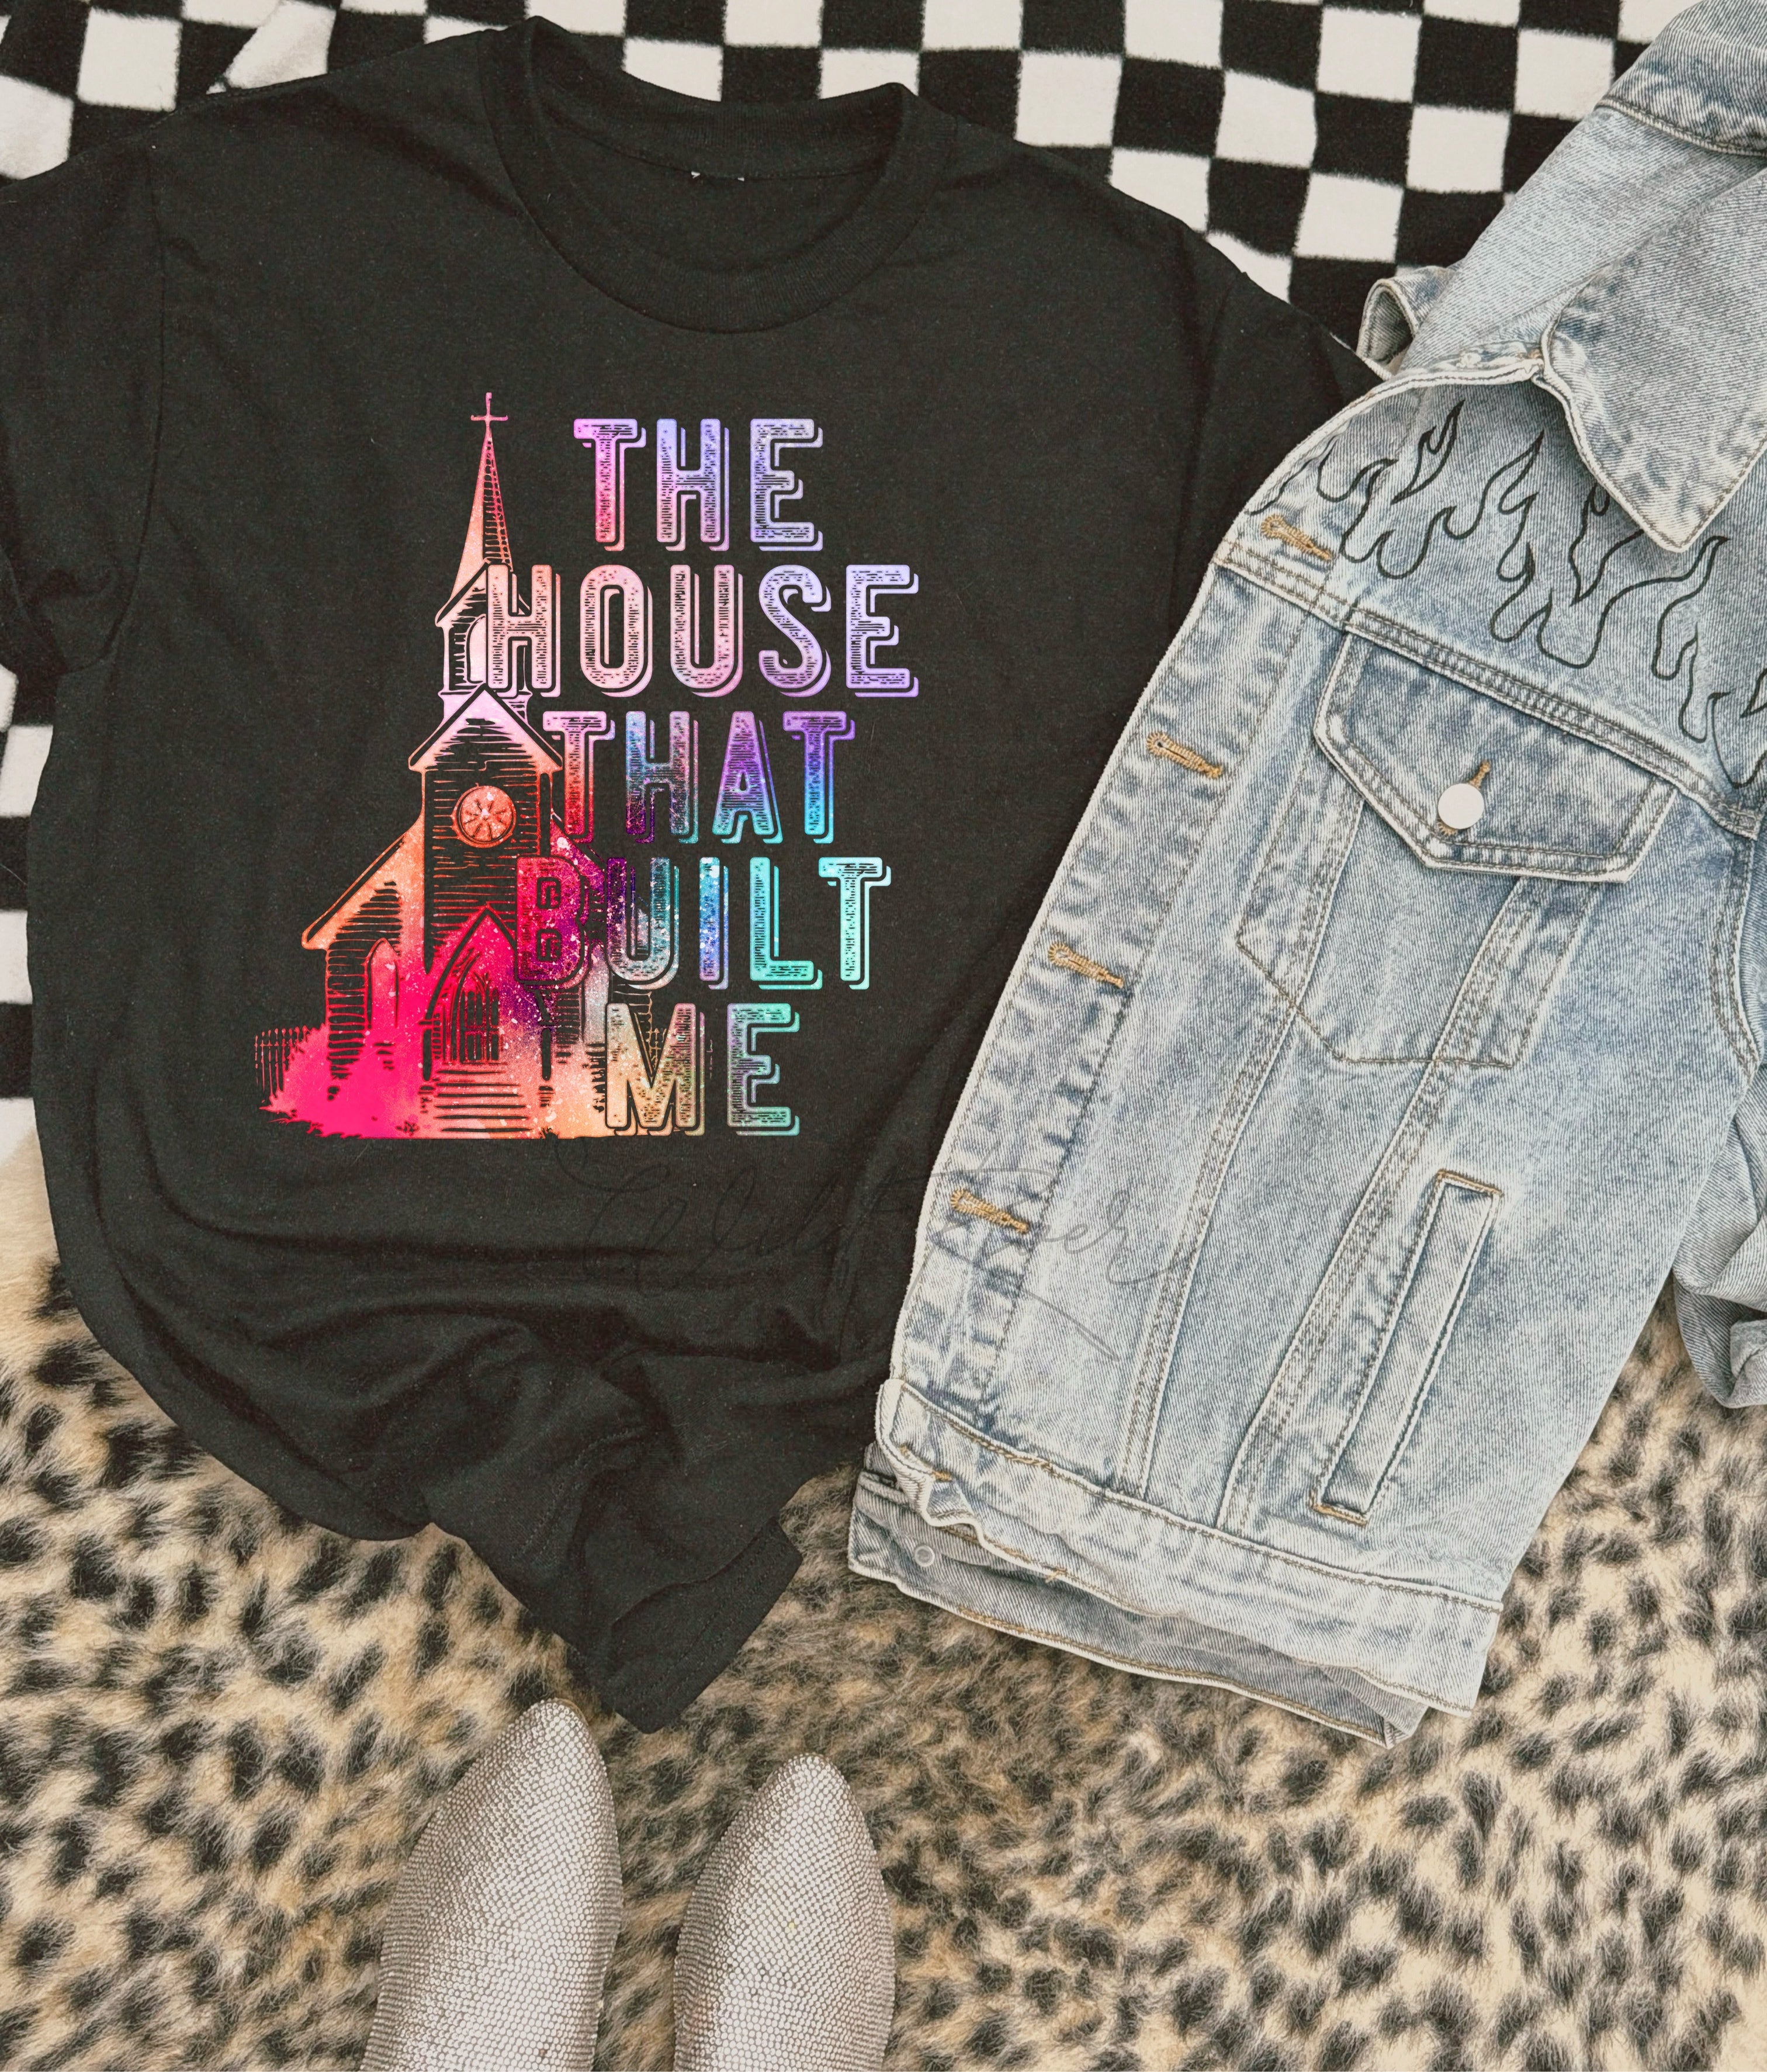 The house that built me tee